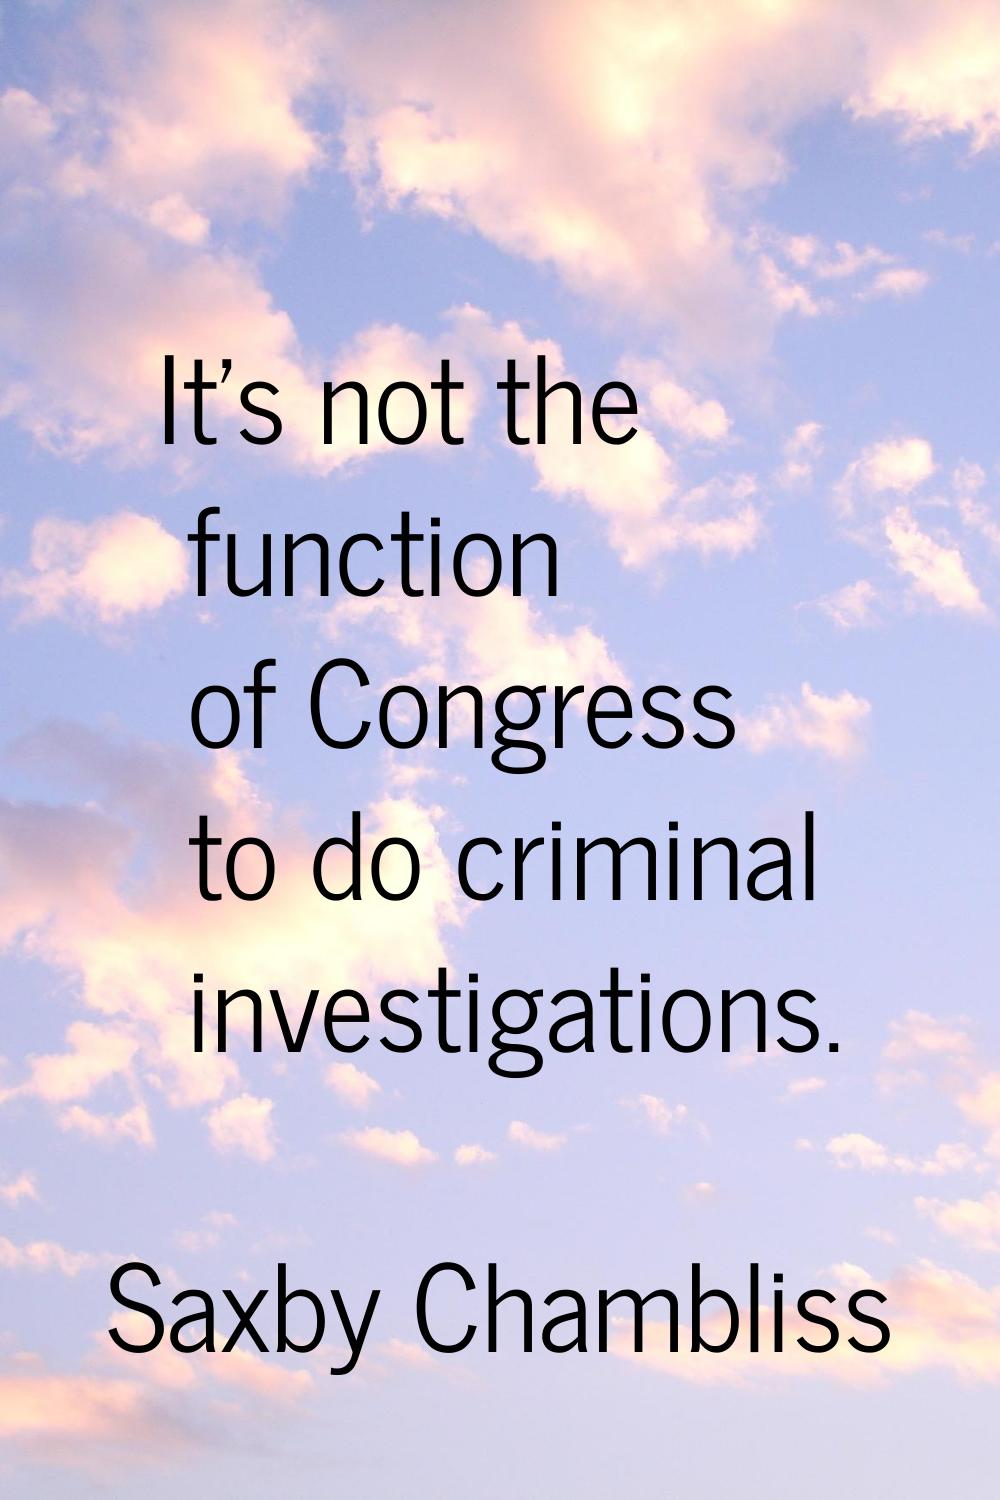 It's not the function of Congress to do criminal investigations.